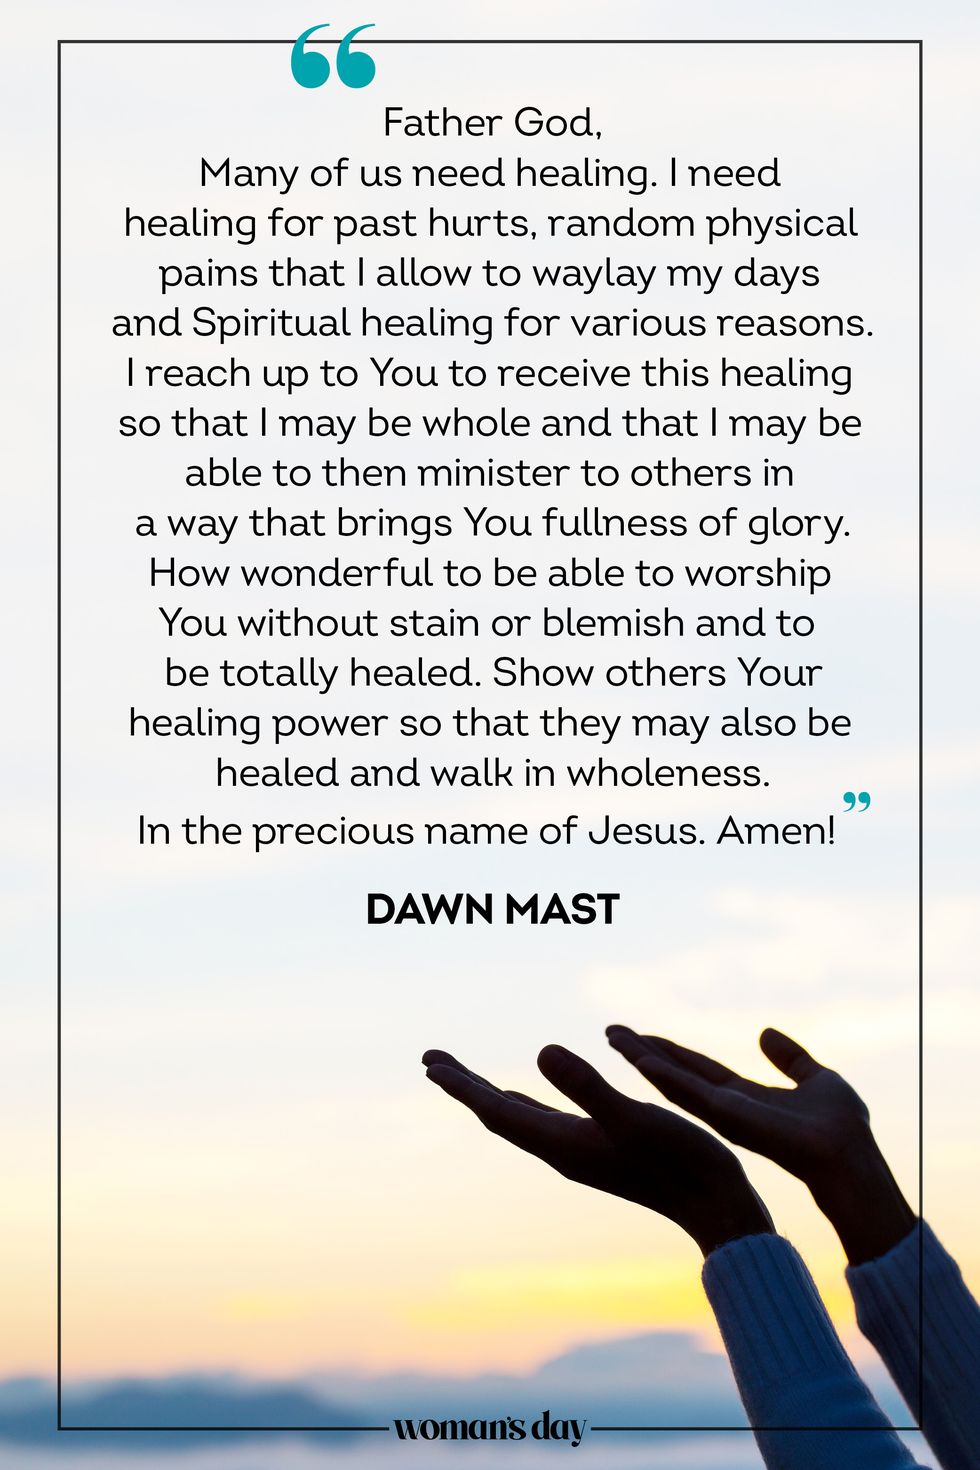 25 Prayers for the Sick to Uplift and Encourage Healing - Parade